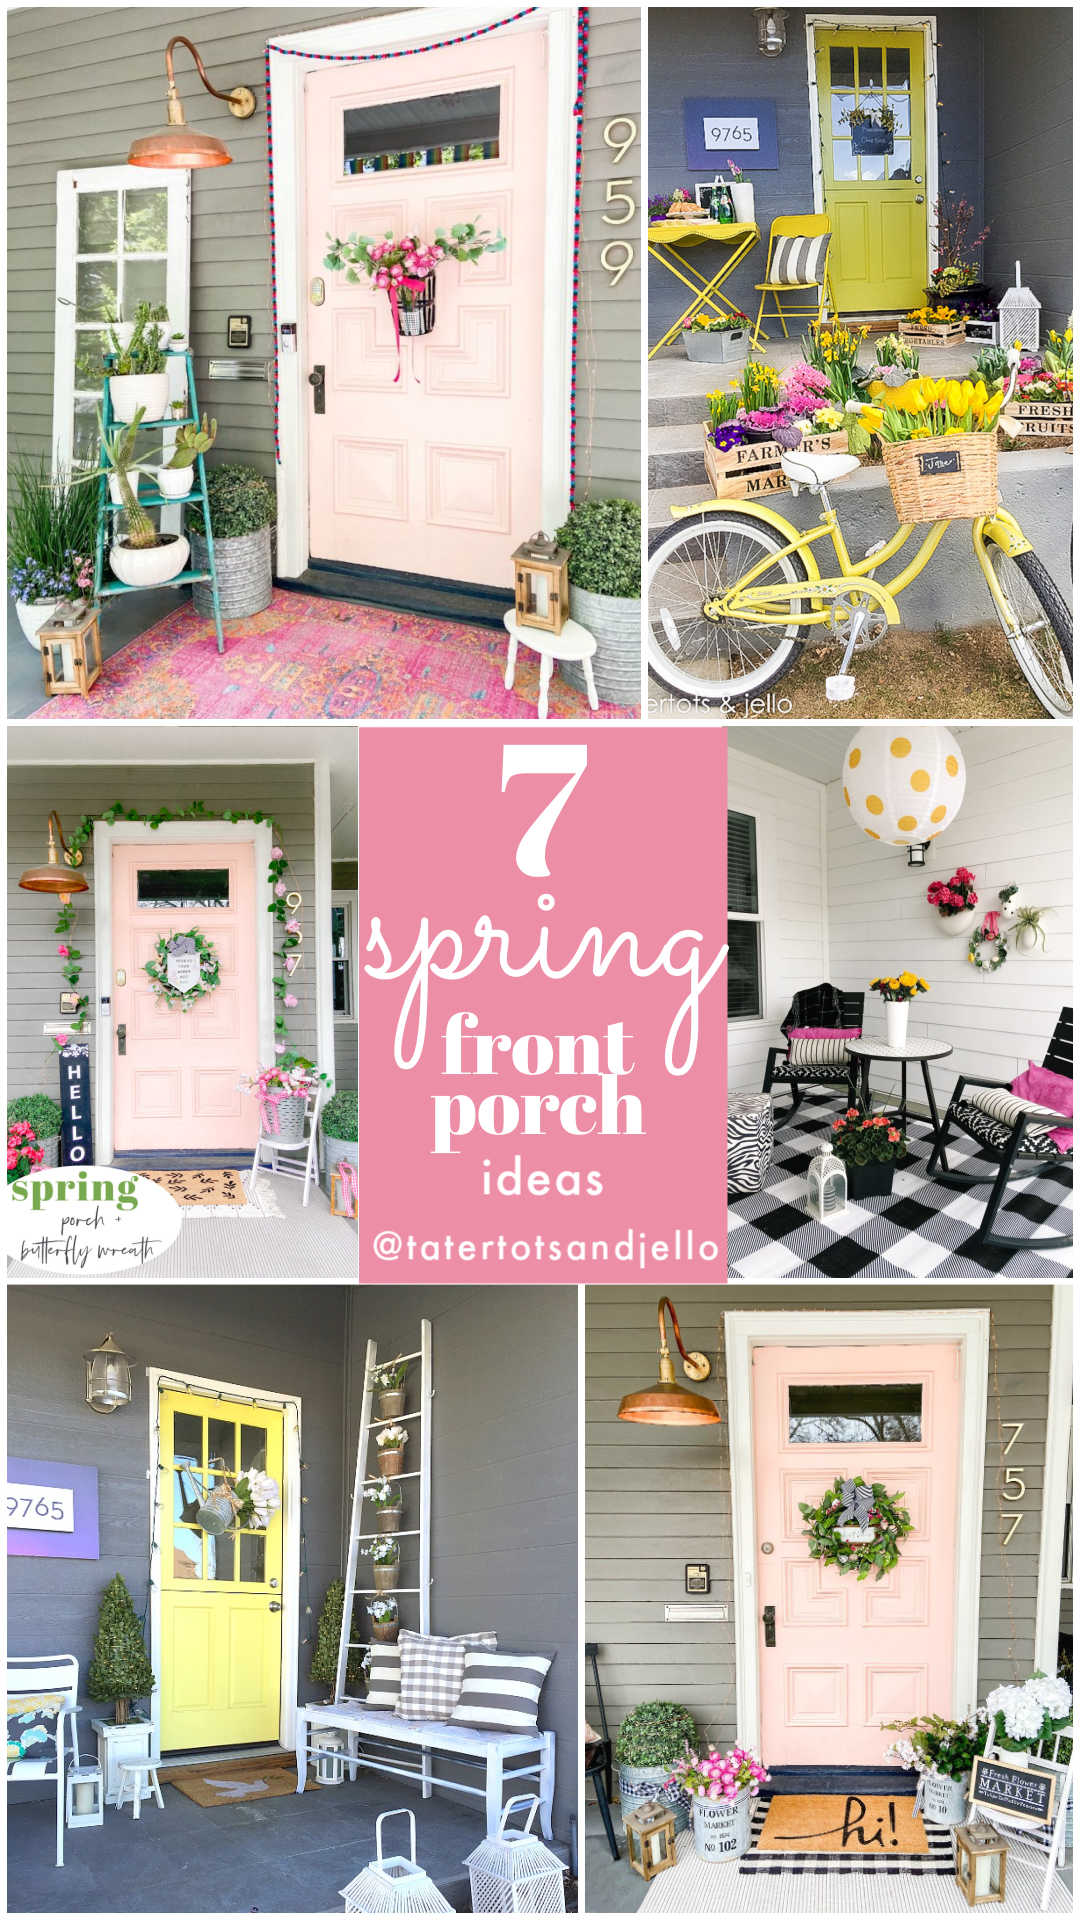 7 Spring Porch Ideas. Get ready for warm weather with these 7 porch ideas and DIY projects to make your porch shine!